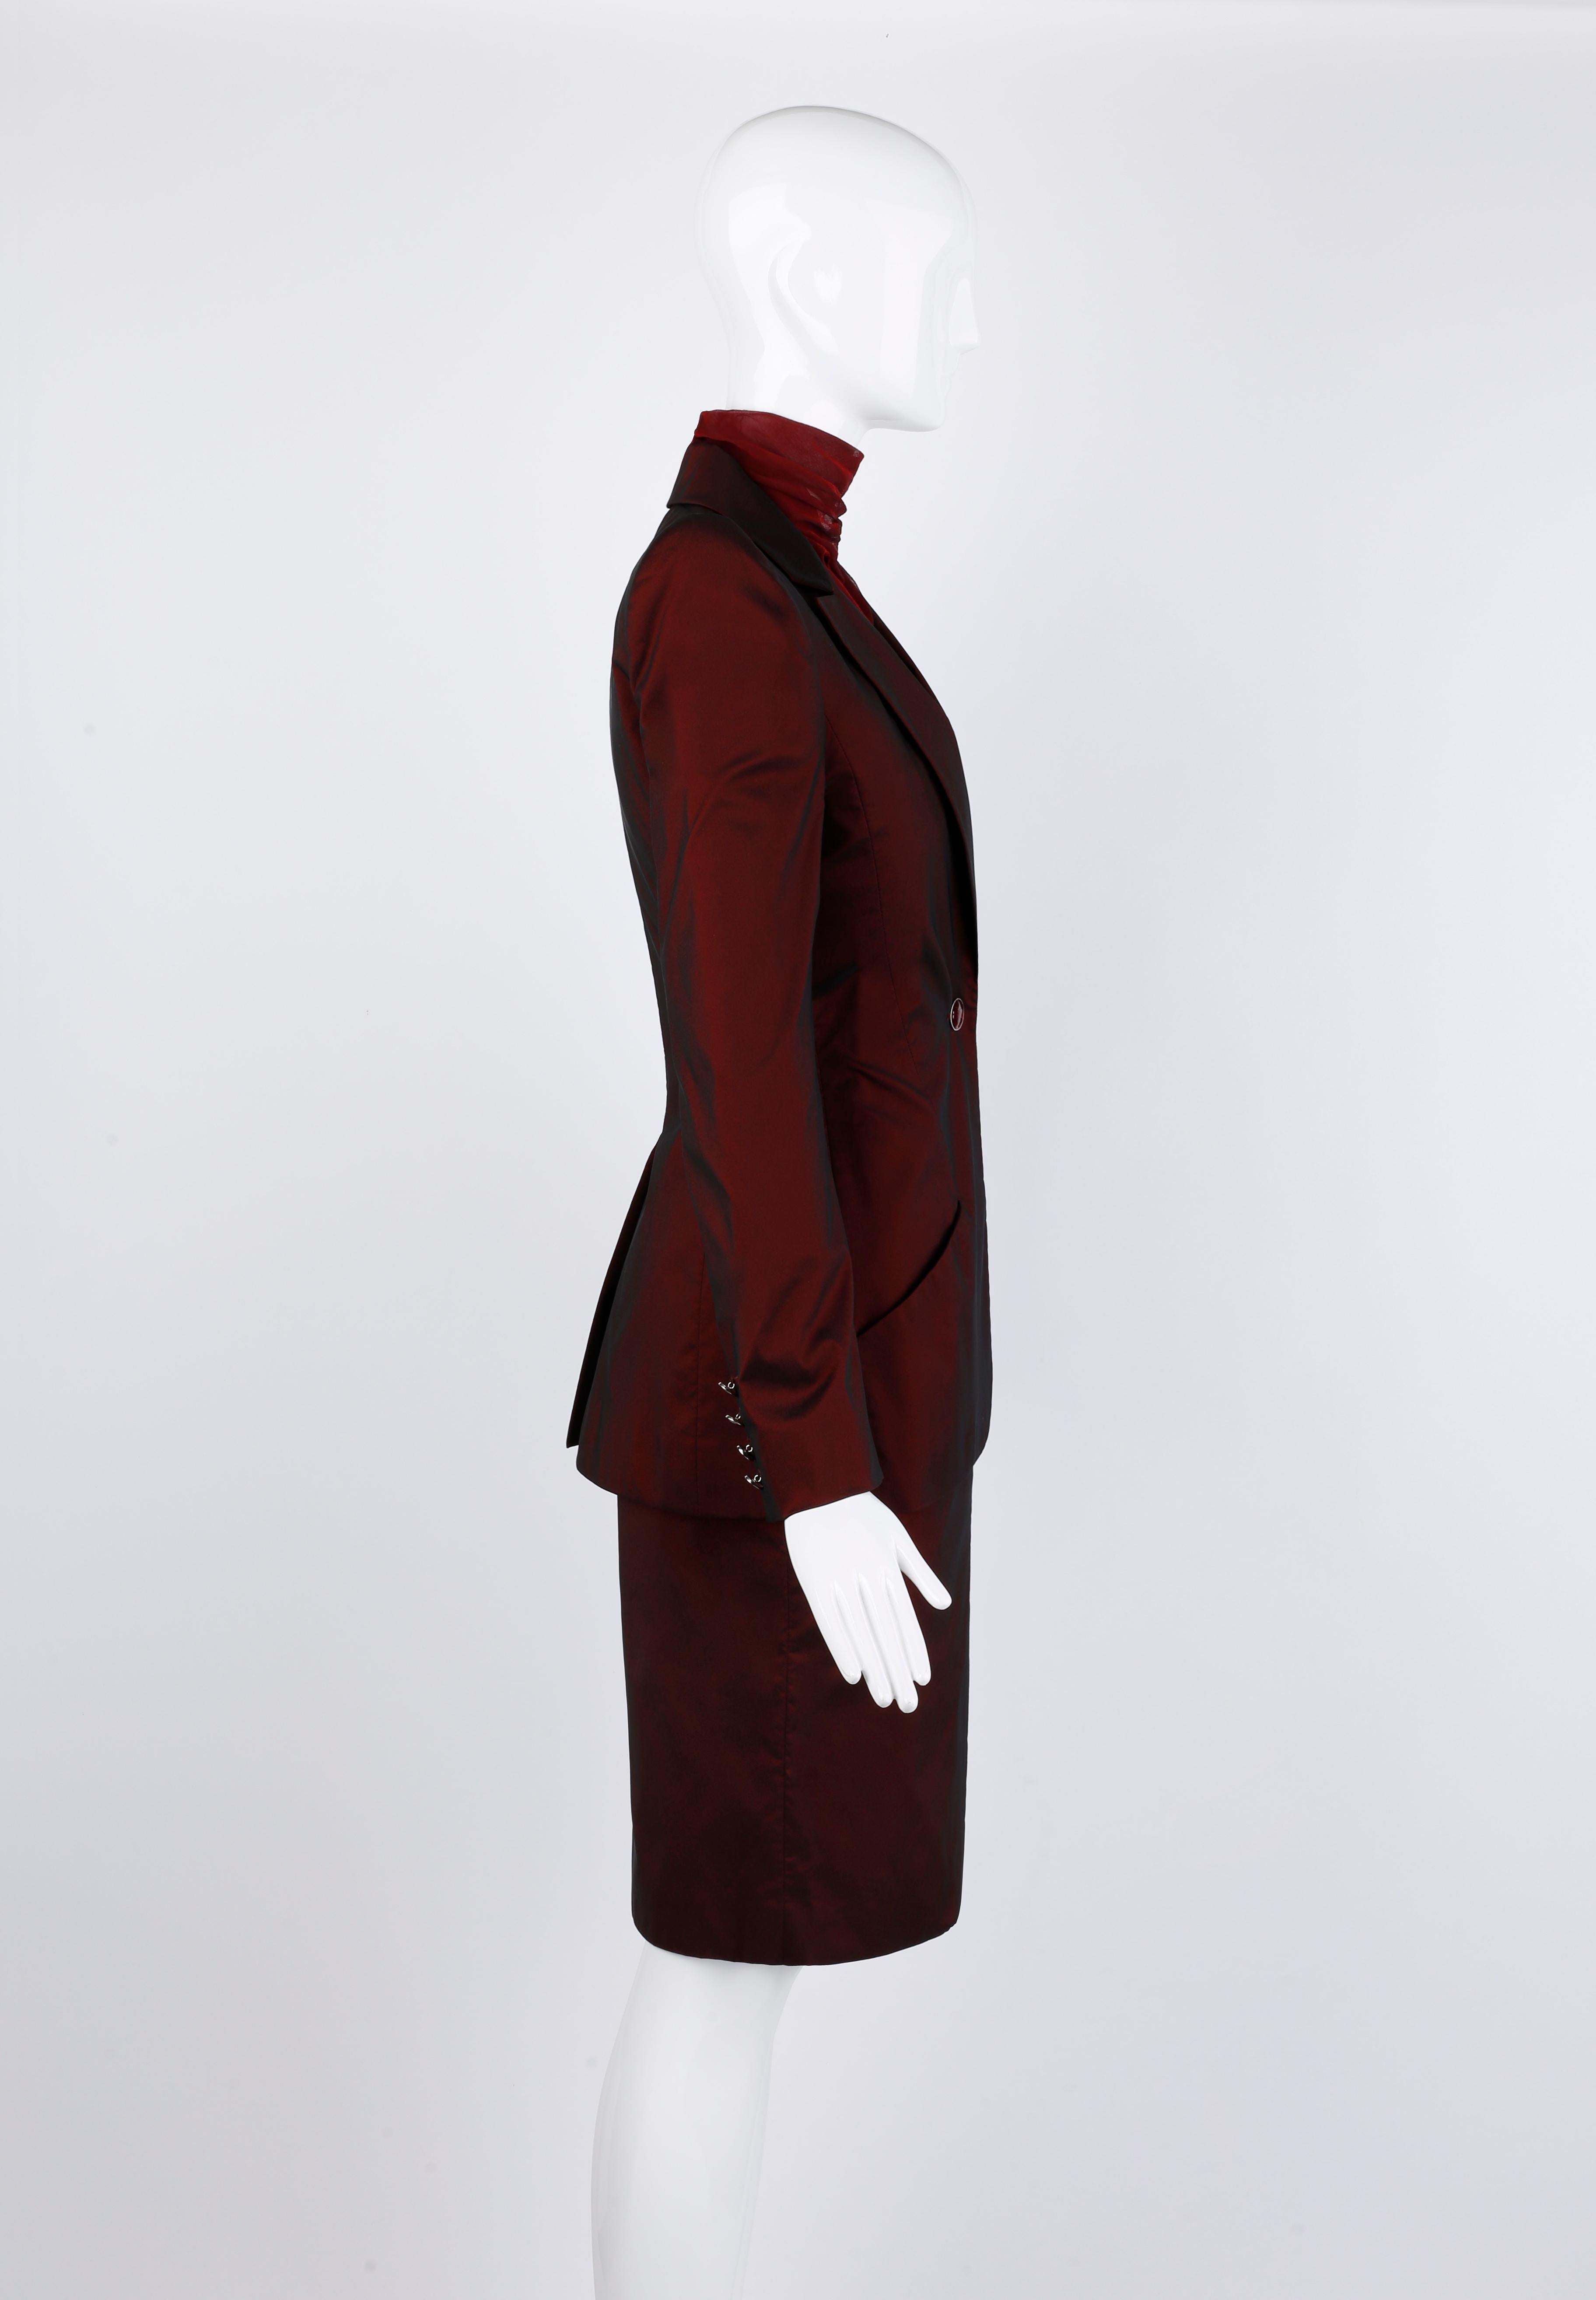 Givenchy Couture Alexander McQueen F/W 1998 Sheer Mock Neck Dress & Blazer Suit For Sale 6